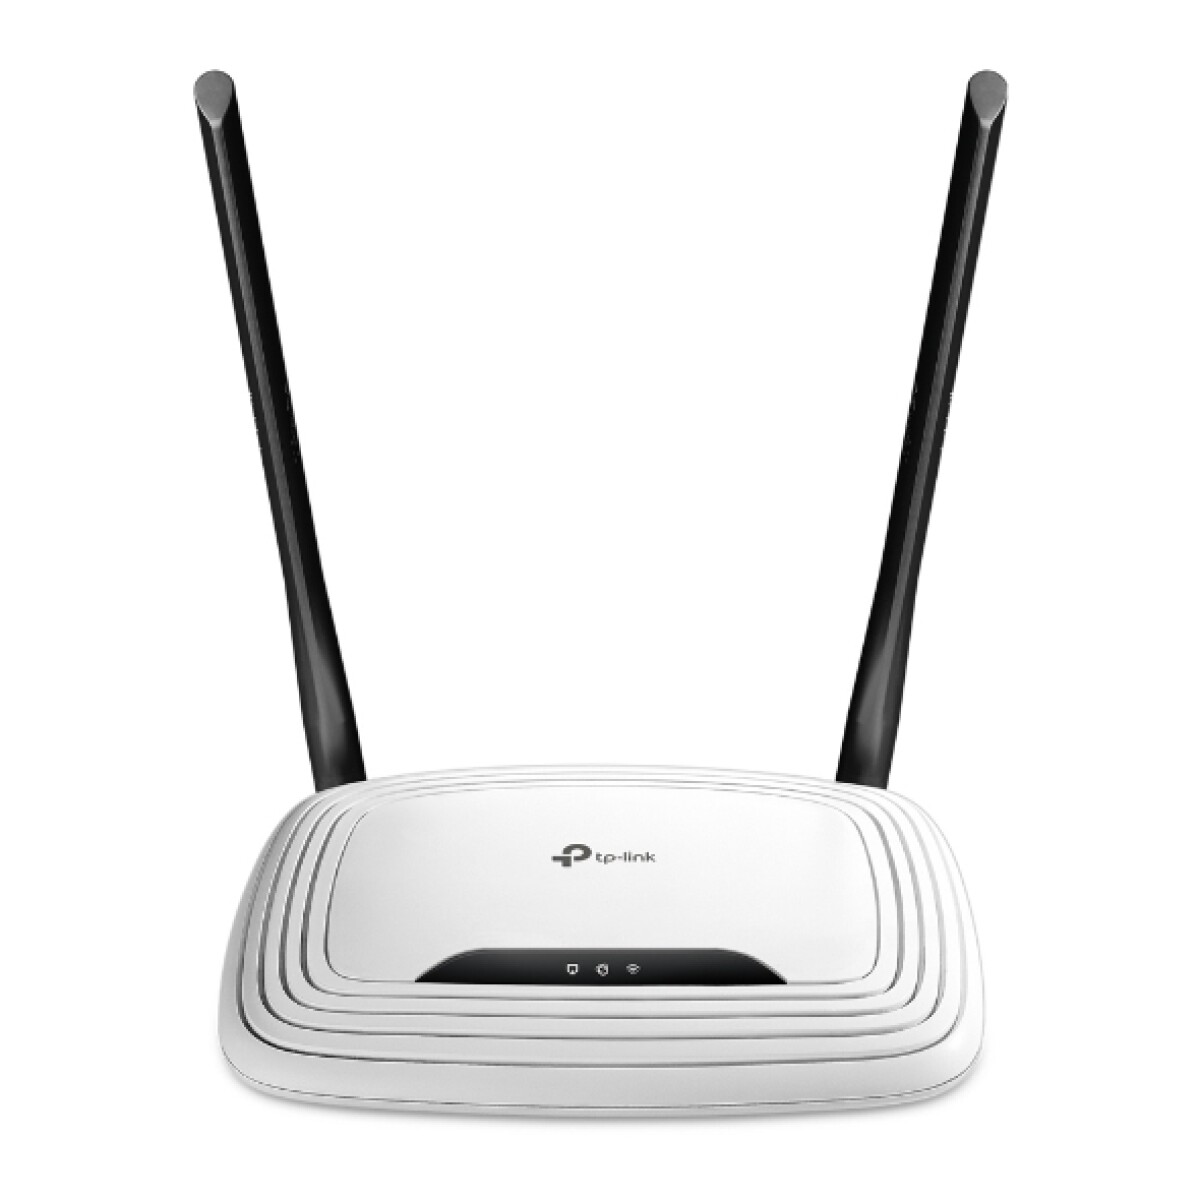 Router inalambrico tp-link tl-wr841n 300mbps 2 antenas - Blanco 